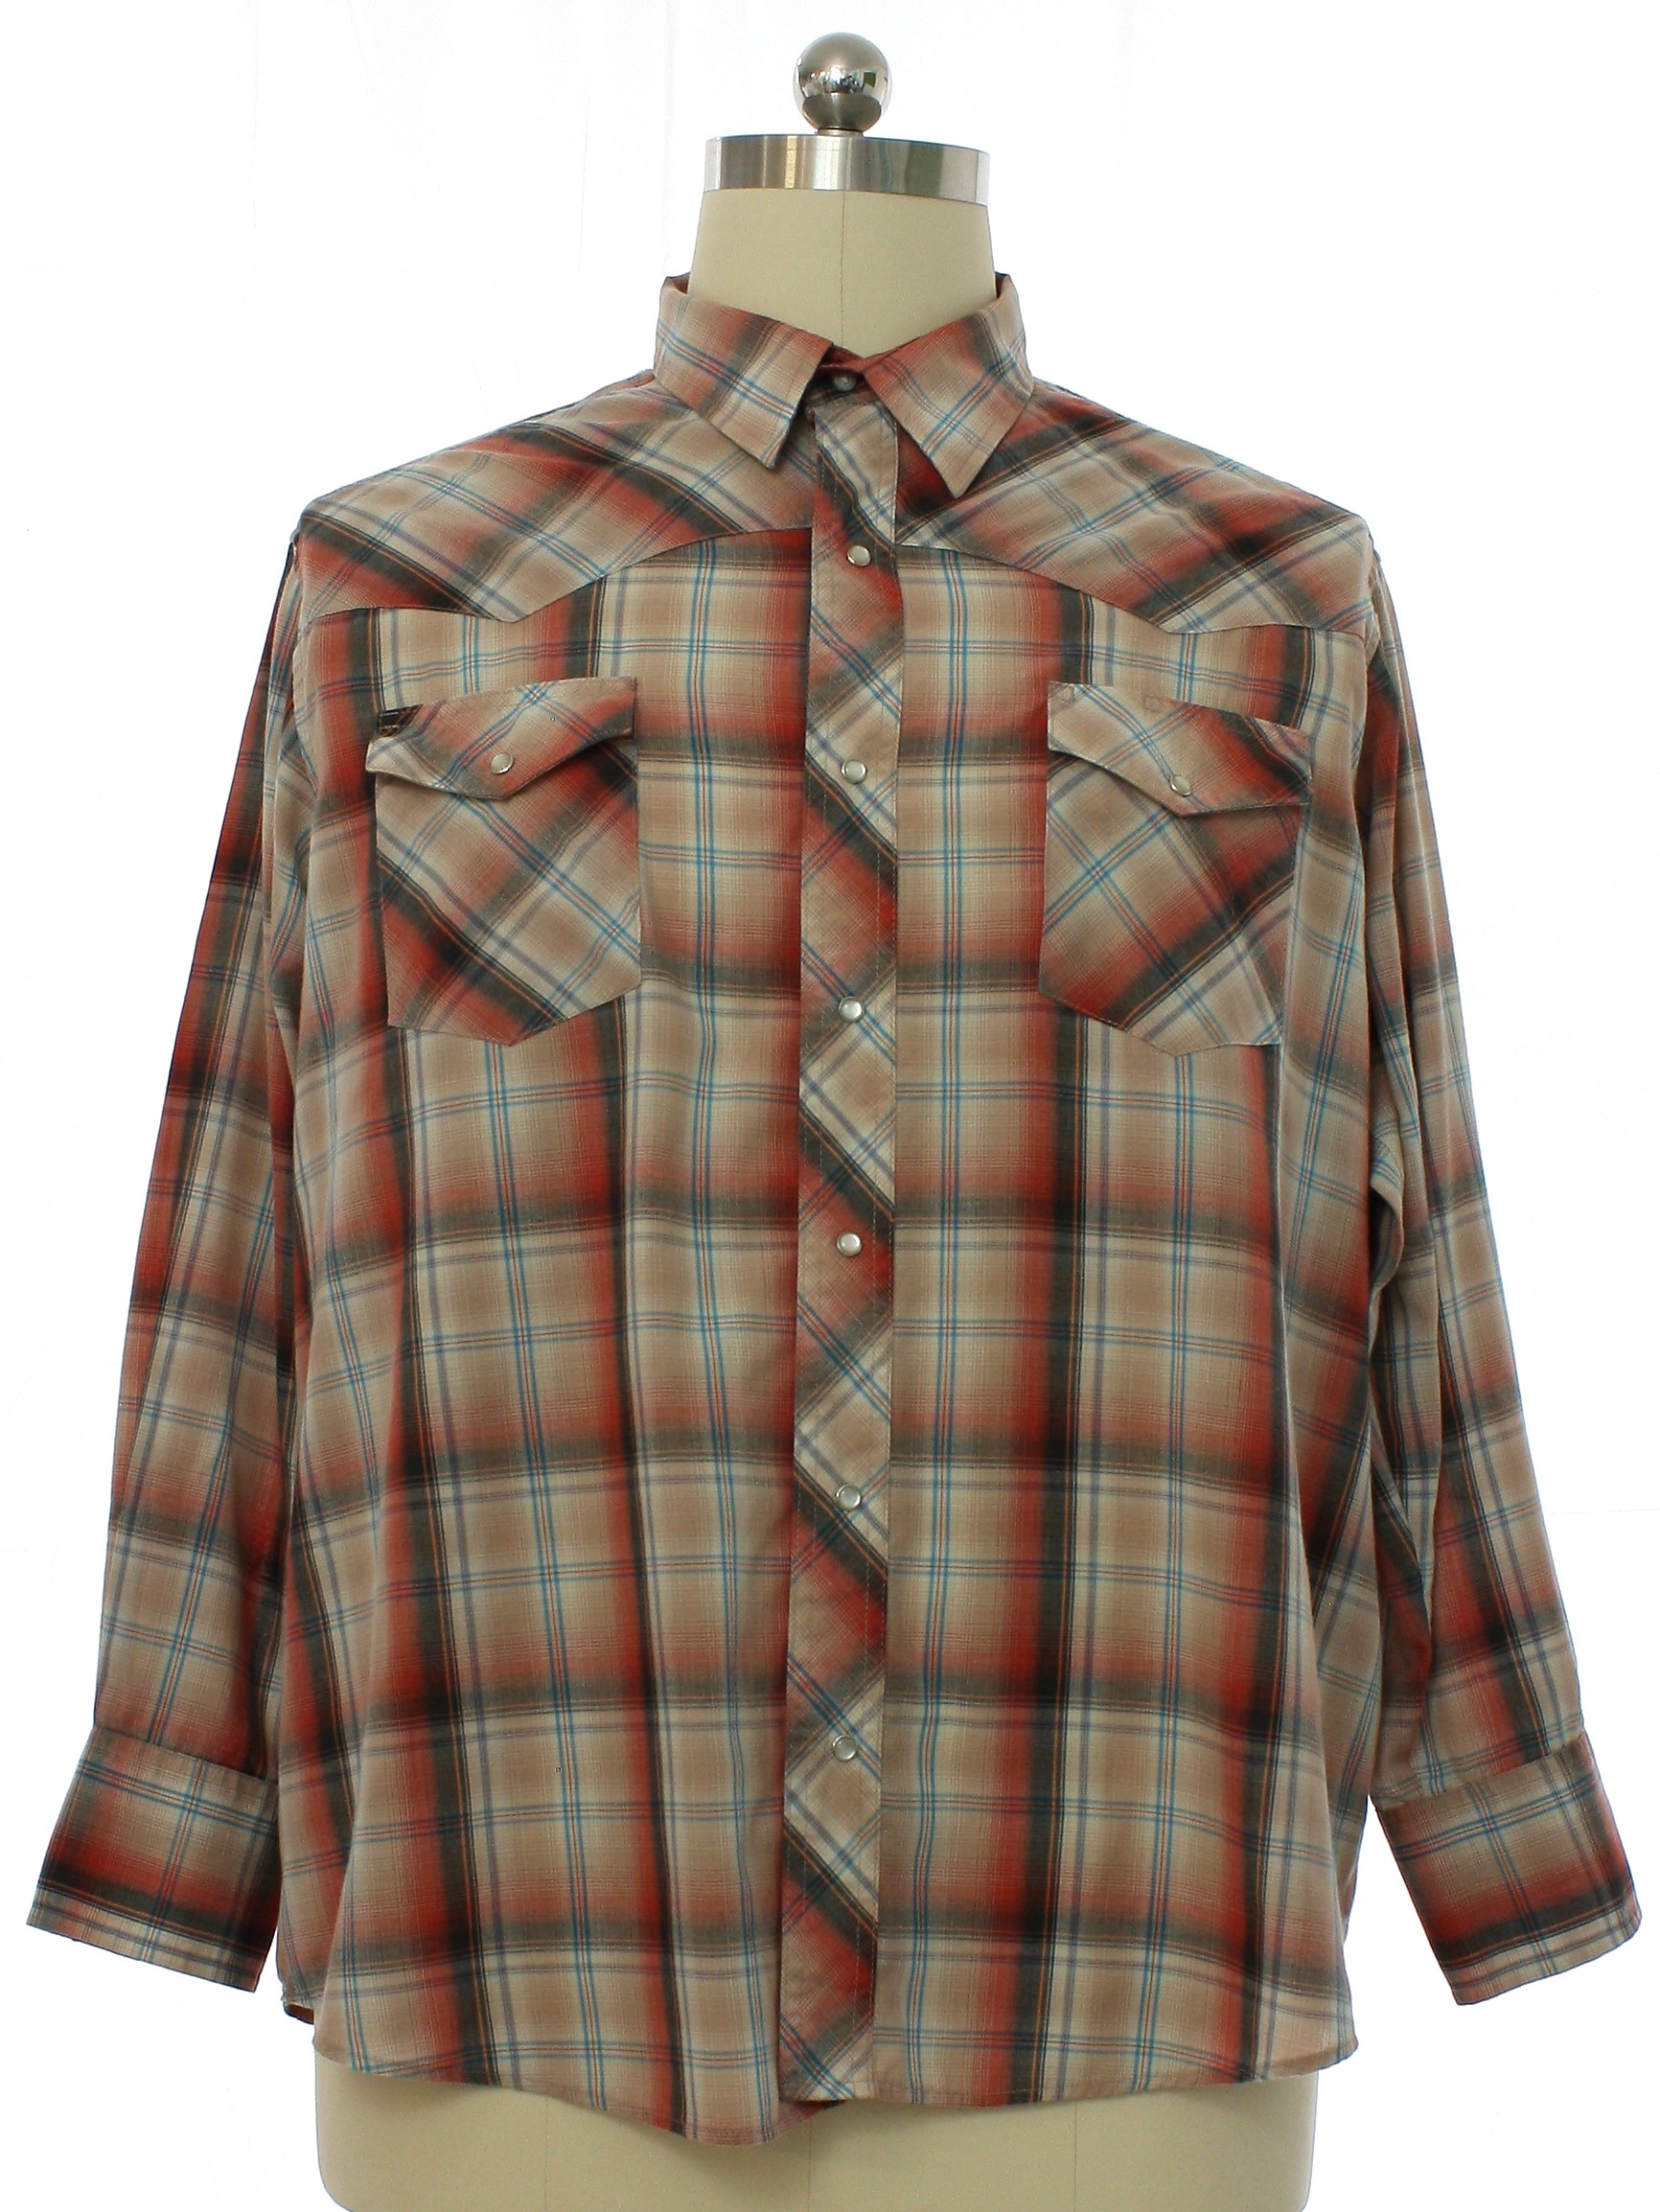 90s Vintage Wrangler Western Shirt: 90s -Wrangler- Mens red, black, white,  tan, and blue plaid polyester cotton blend longsleeve western shirt.  pearlized snaps at front placket and cuffs. Fold over collar, front